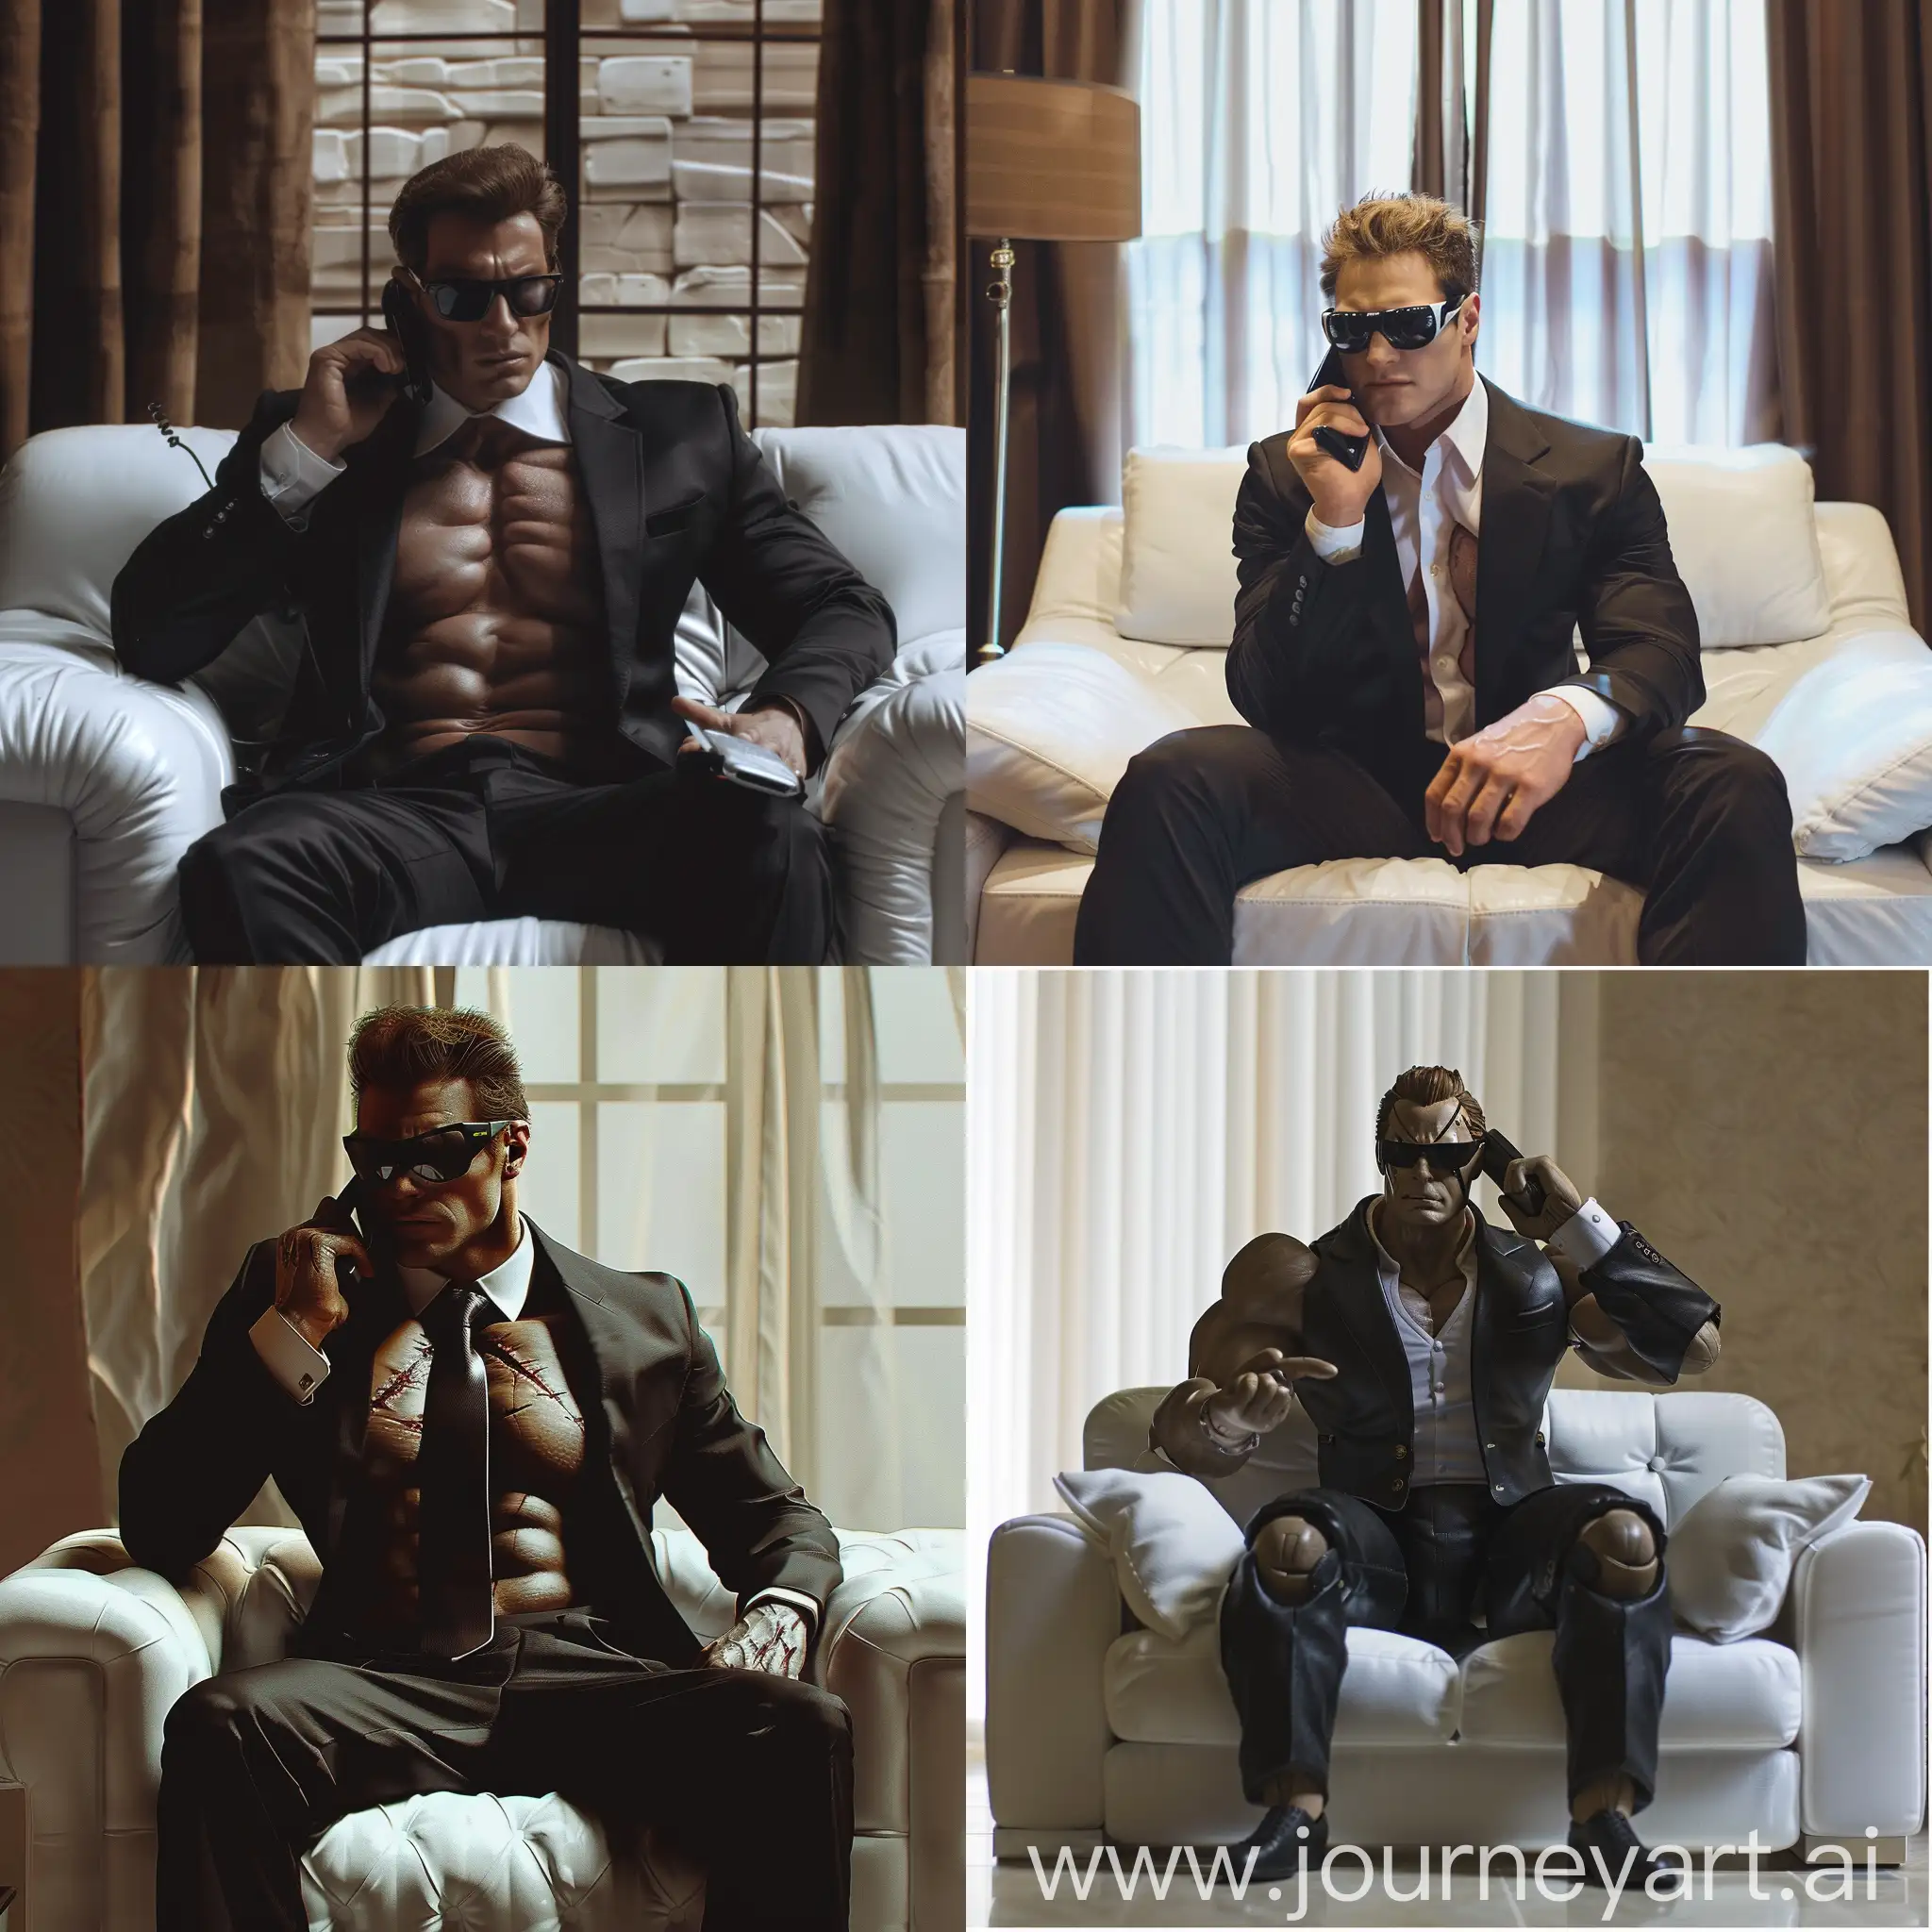 Strong-Patrick-Bateman-in-Suit-on-White-Leather-Sofa-Talking-on-Phone